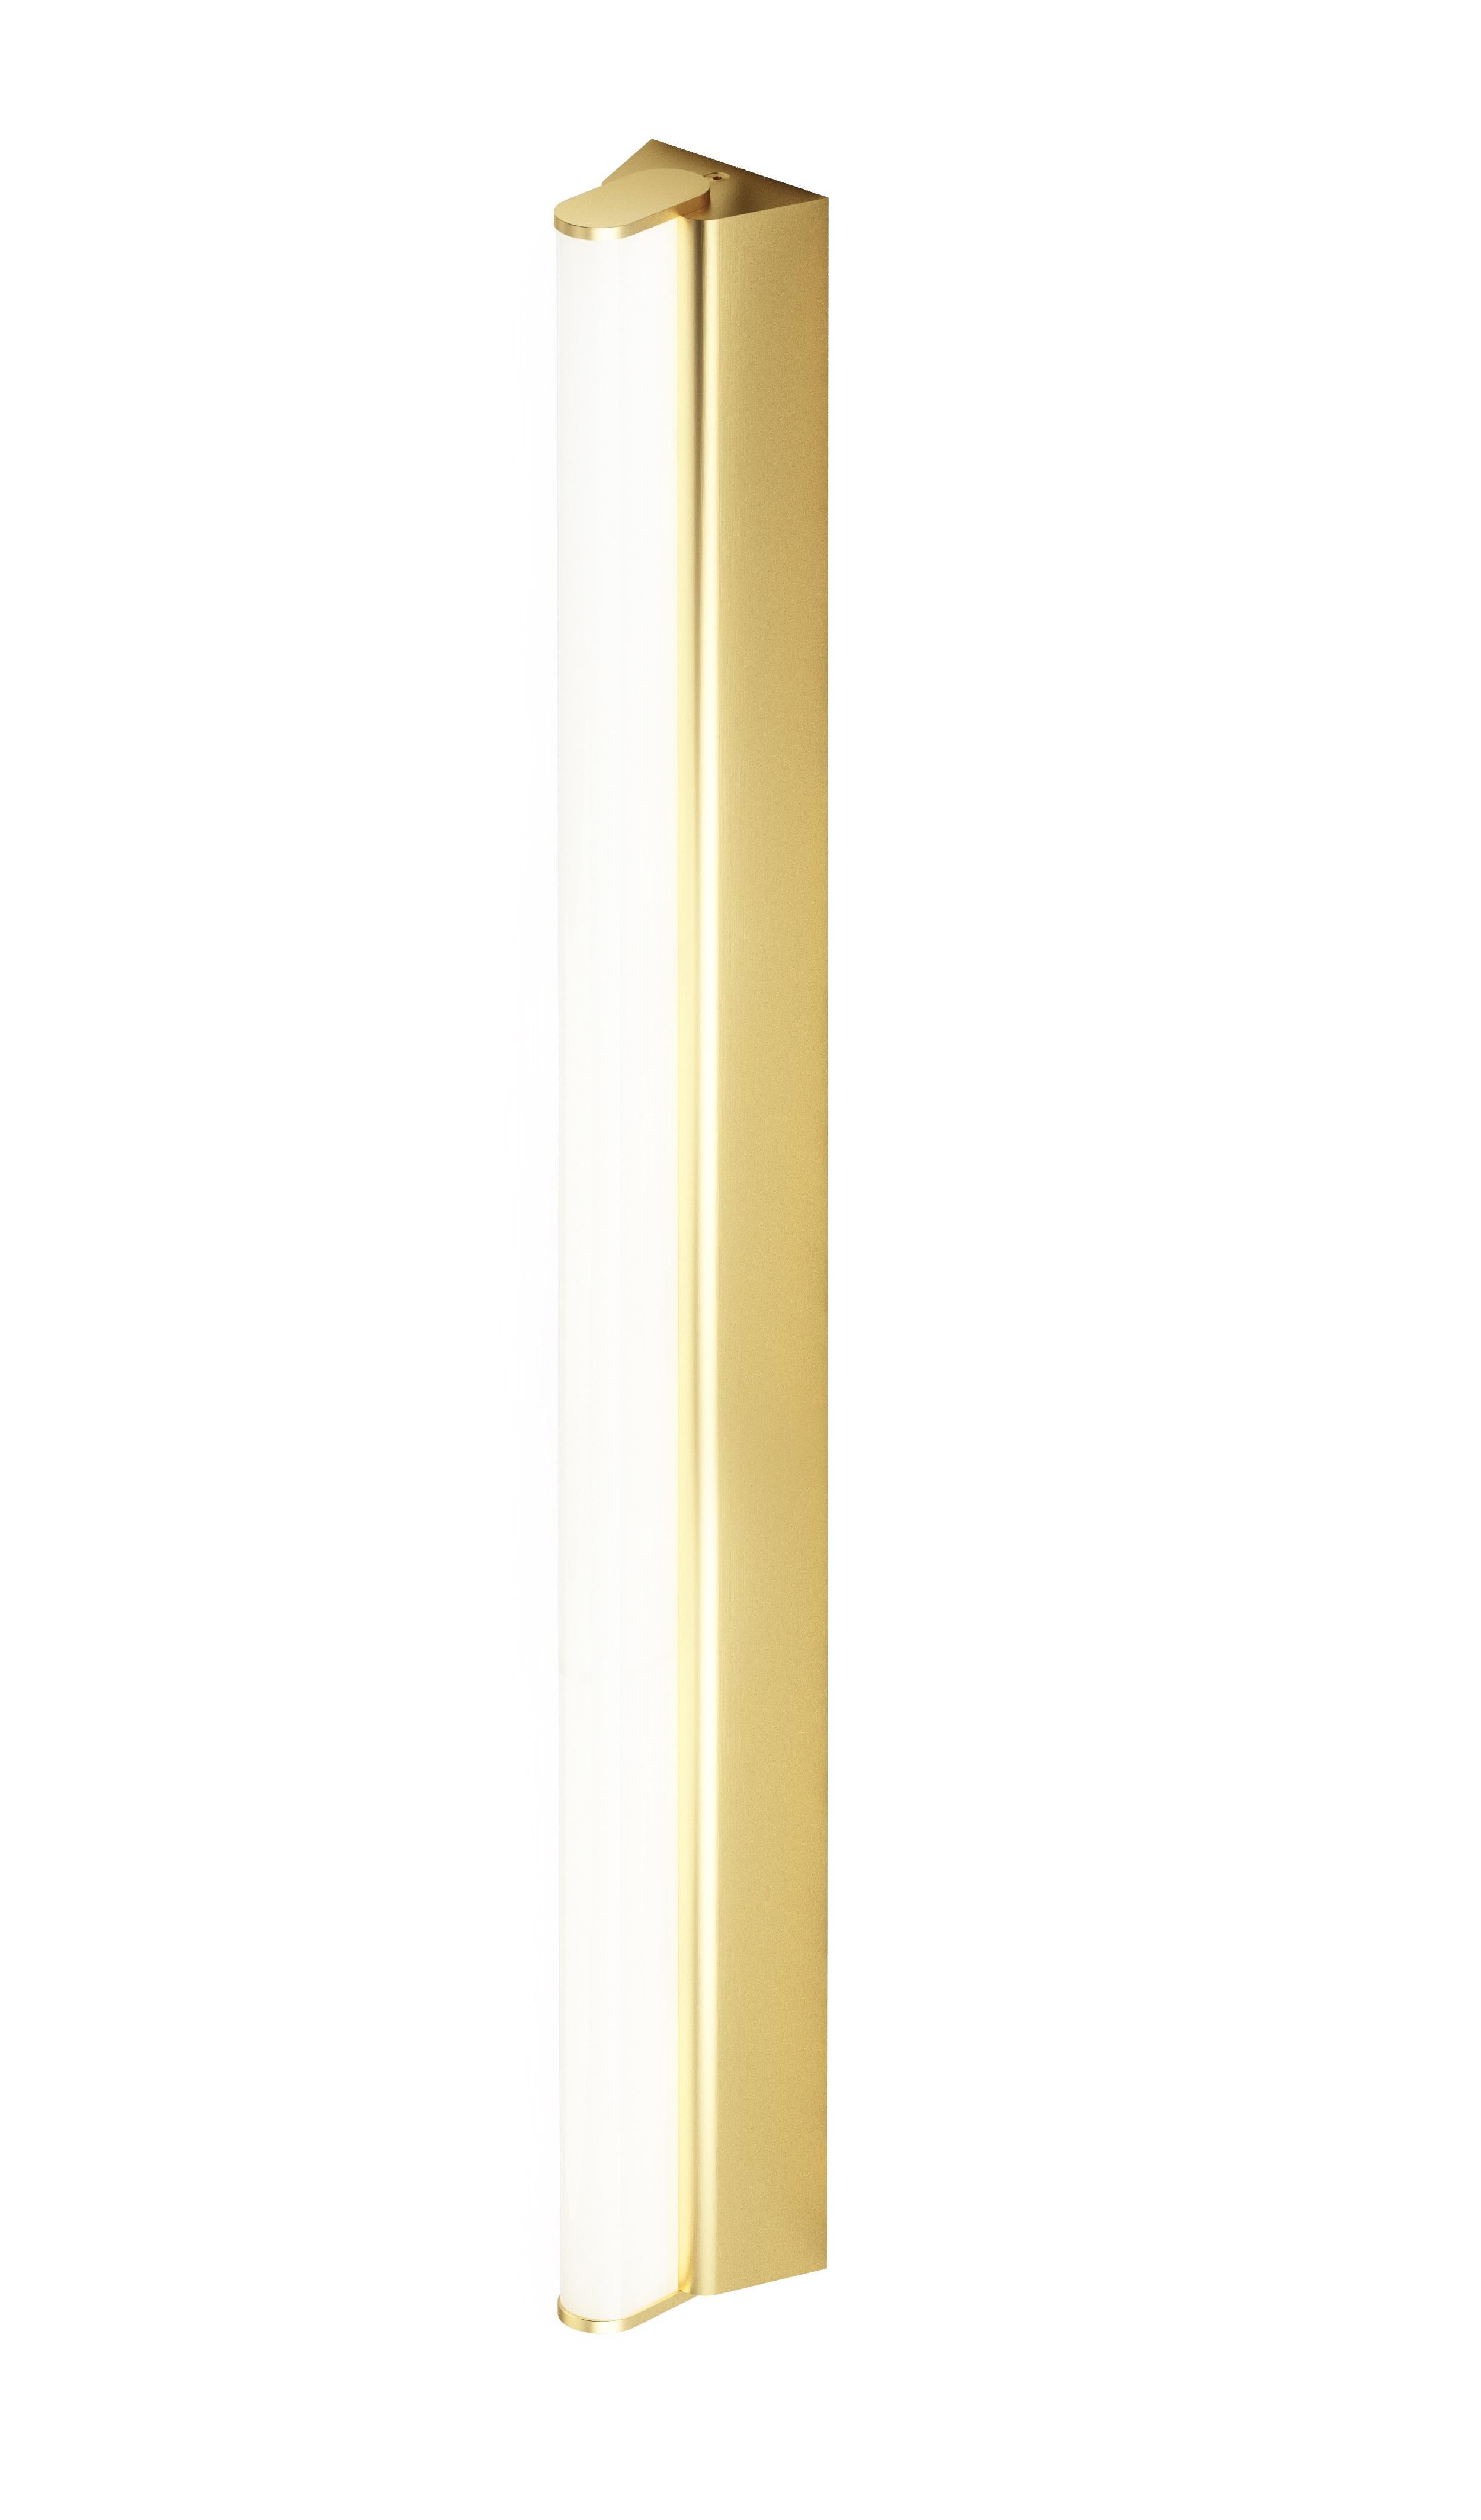 IP Metrop 525 satin brass wall light by Emilie Cathelineau
Dimensions: D52.5 x W5 X H4.5 cm
Materials: Solid brass, Satin Brass, LED, Polycarbonate.
Others finishes and dimensions are available.

All our lamps can be wired according to each